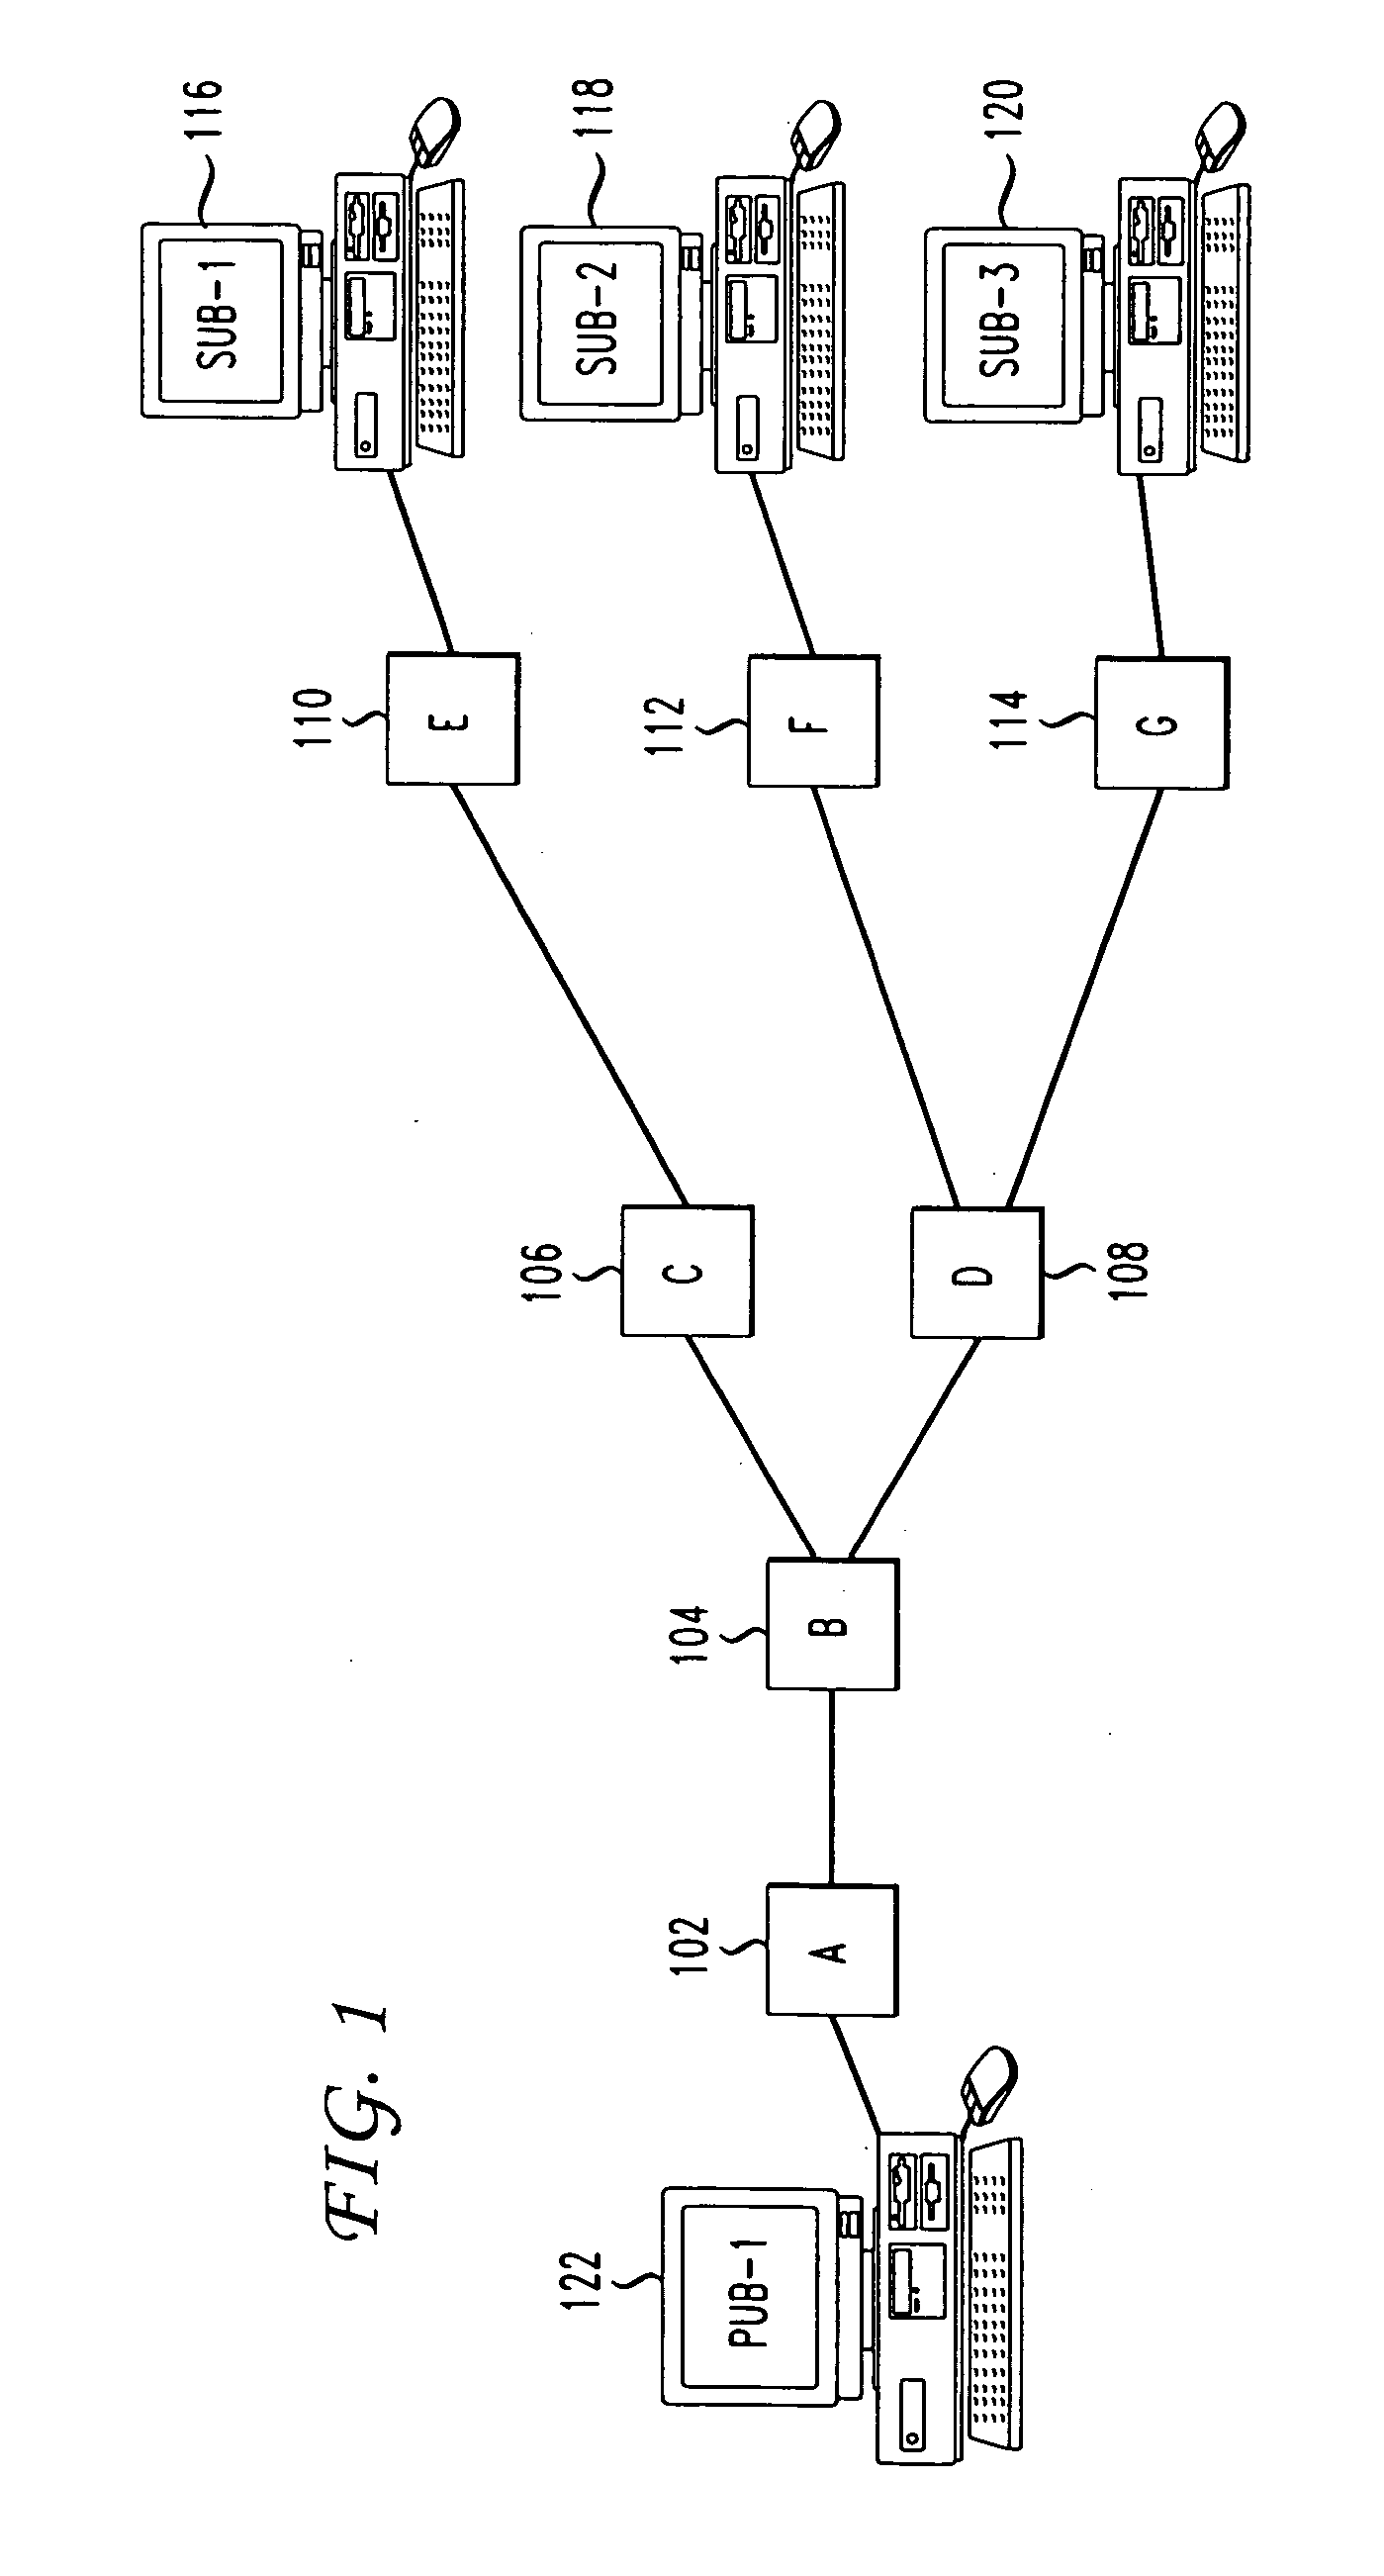 Content based data packet routing using labels